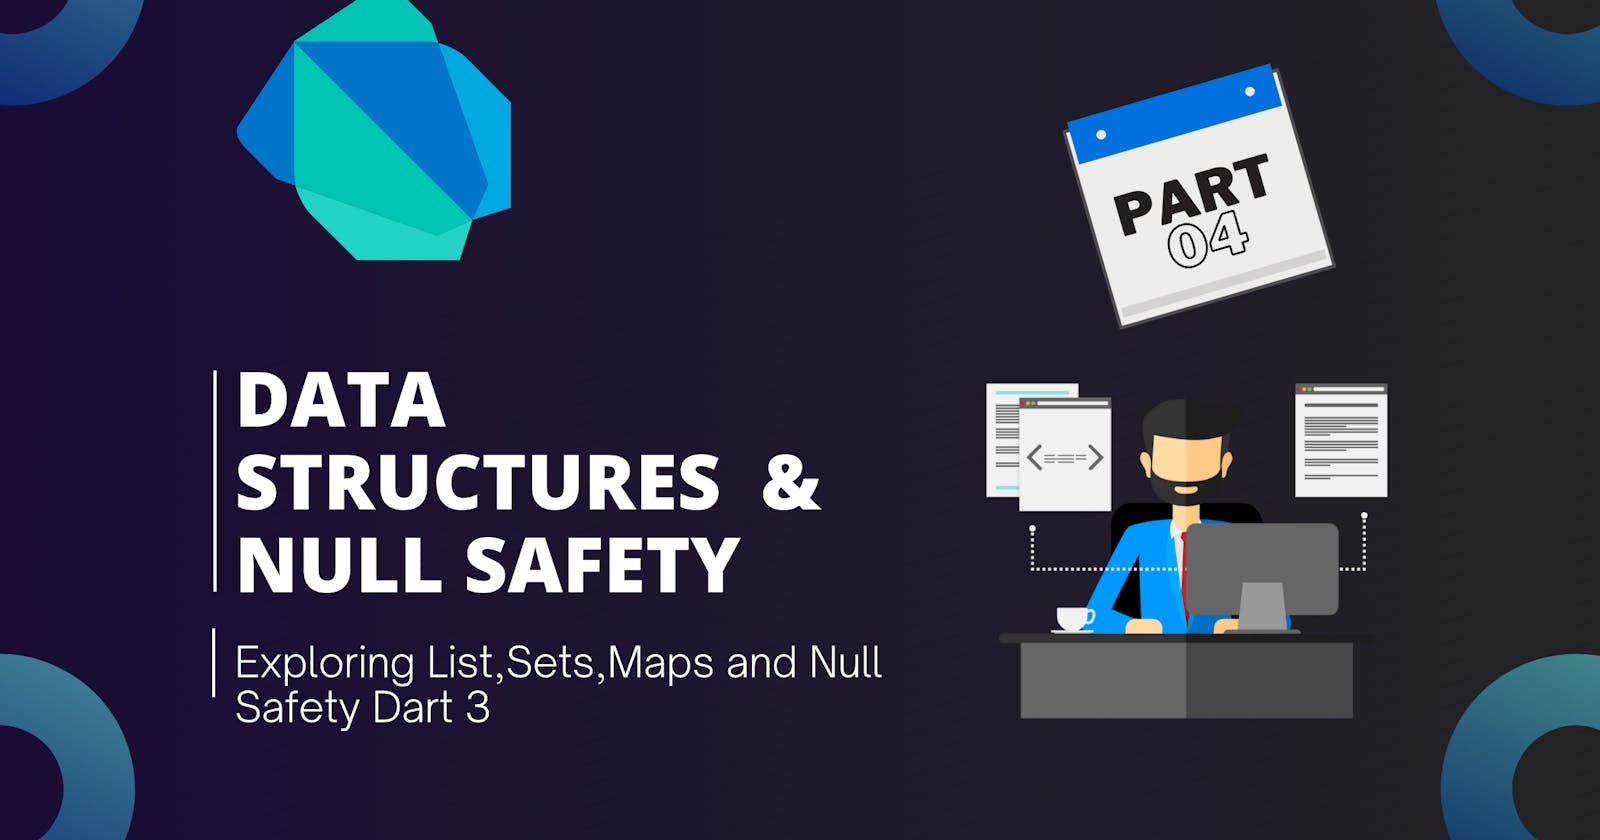 Data Structures and Null Safety in Dart - Part 4